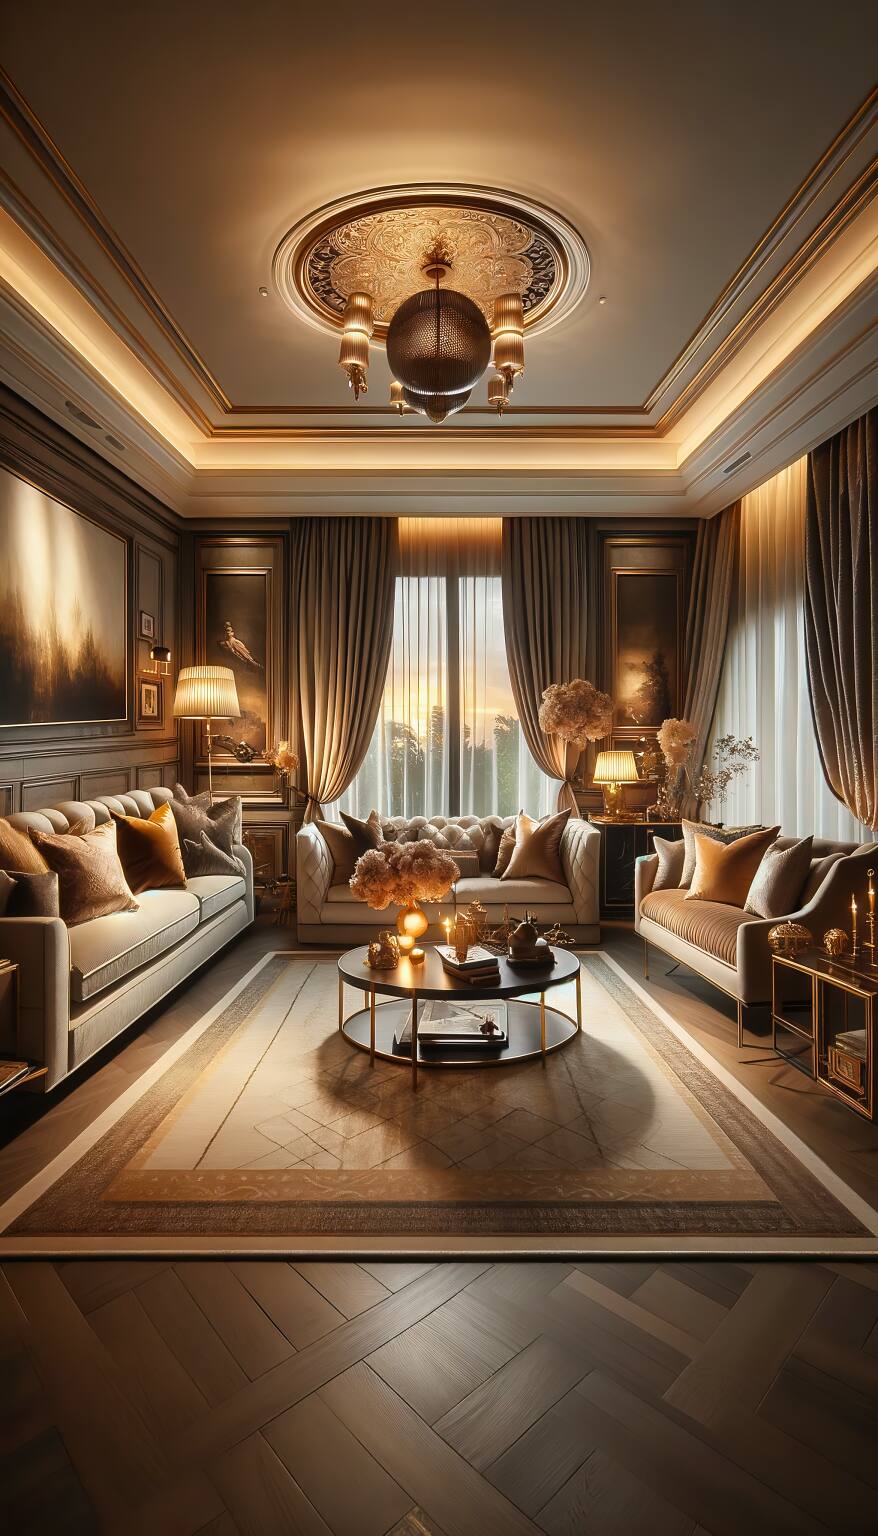 A Romantic Living Room In Golden And Taupe Hues, Featuring An Elegant Sofa And Luxurious Chairs, Enveloped In A Warm, Dreamy Twilight Ambiance.